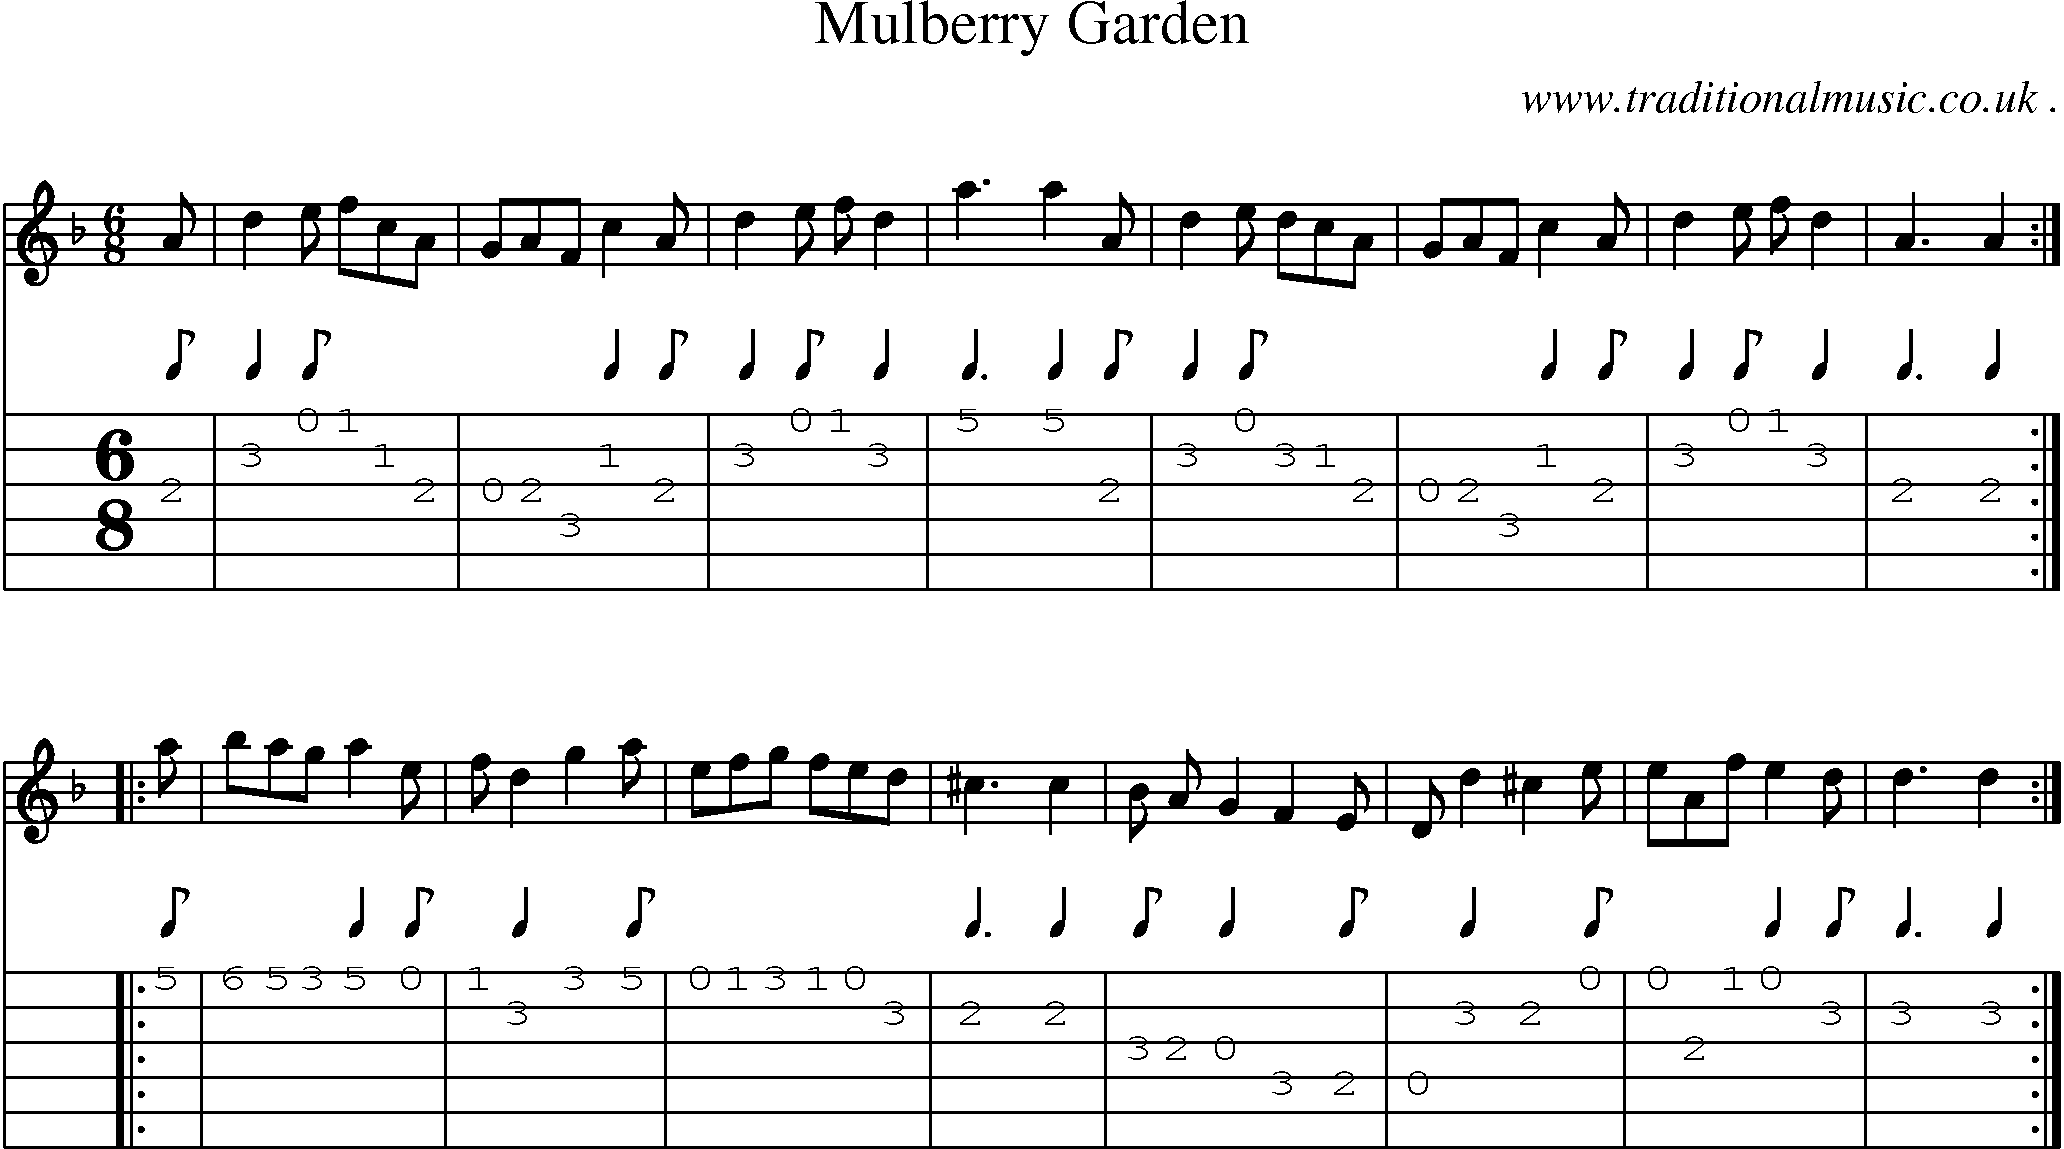 Sheet-Music and Guitar Tabs for Mulberry Garden